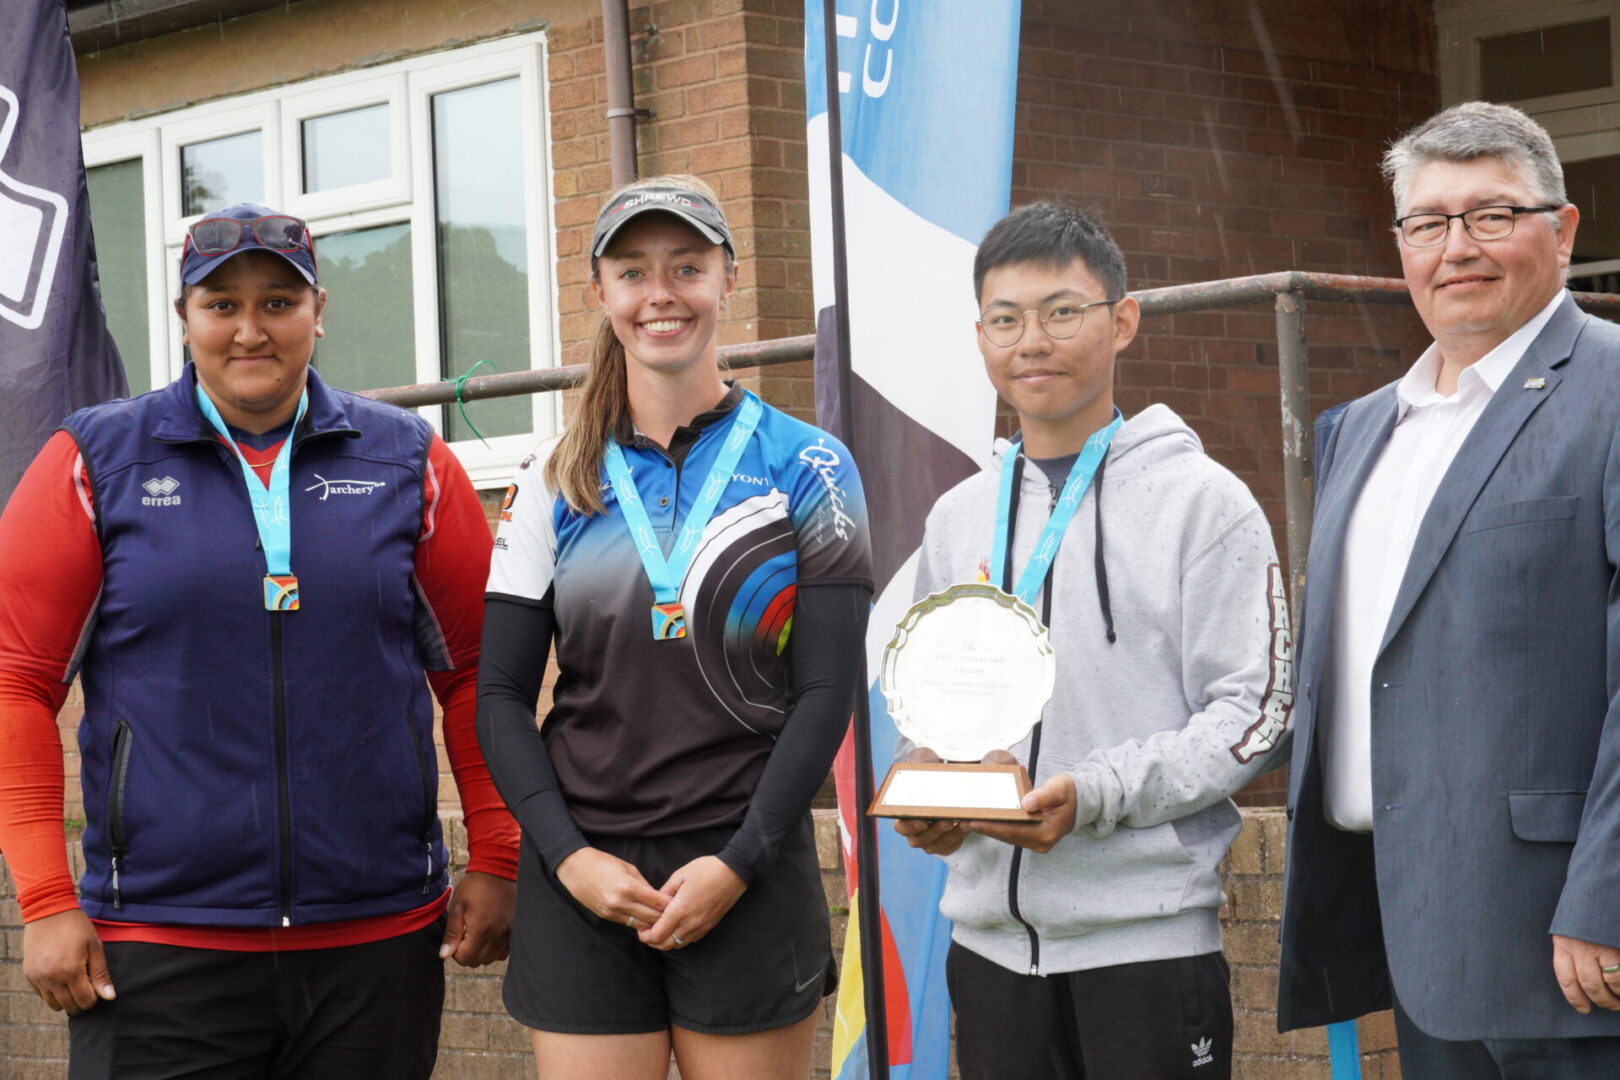 Some of the winners from the British Target Championships 2022